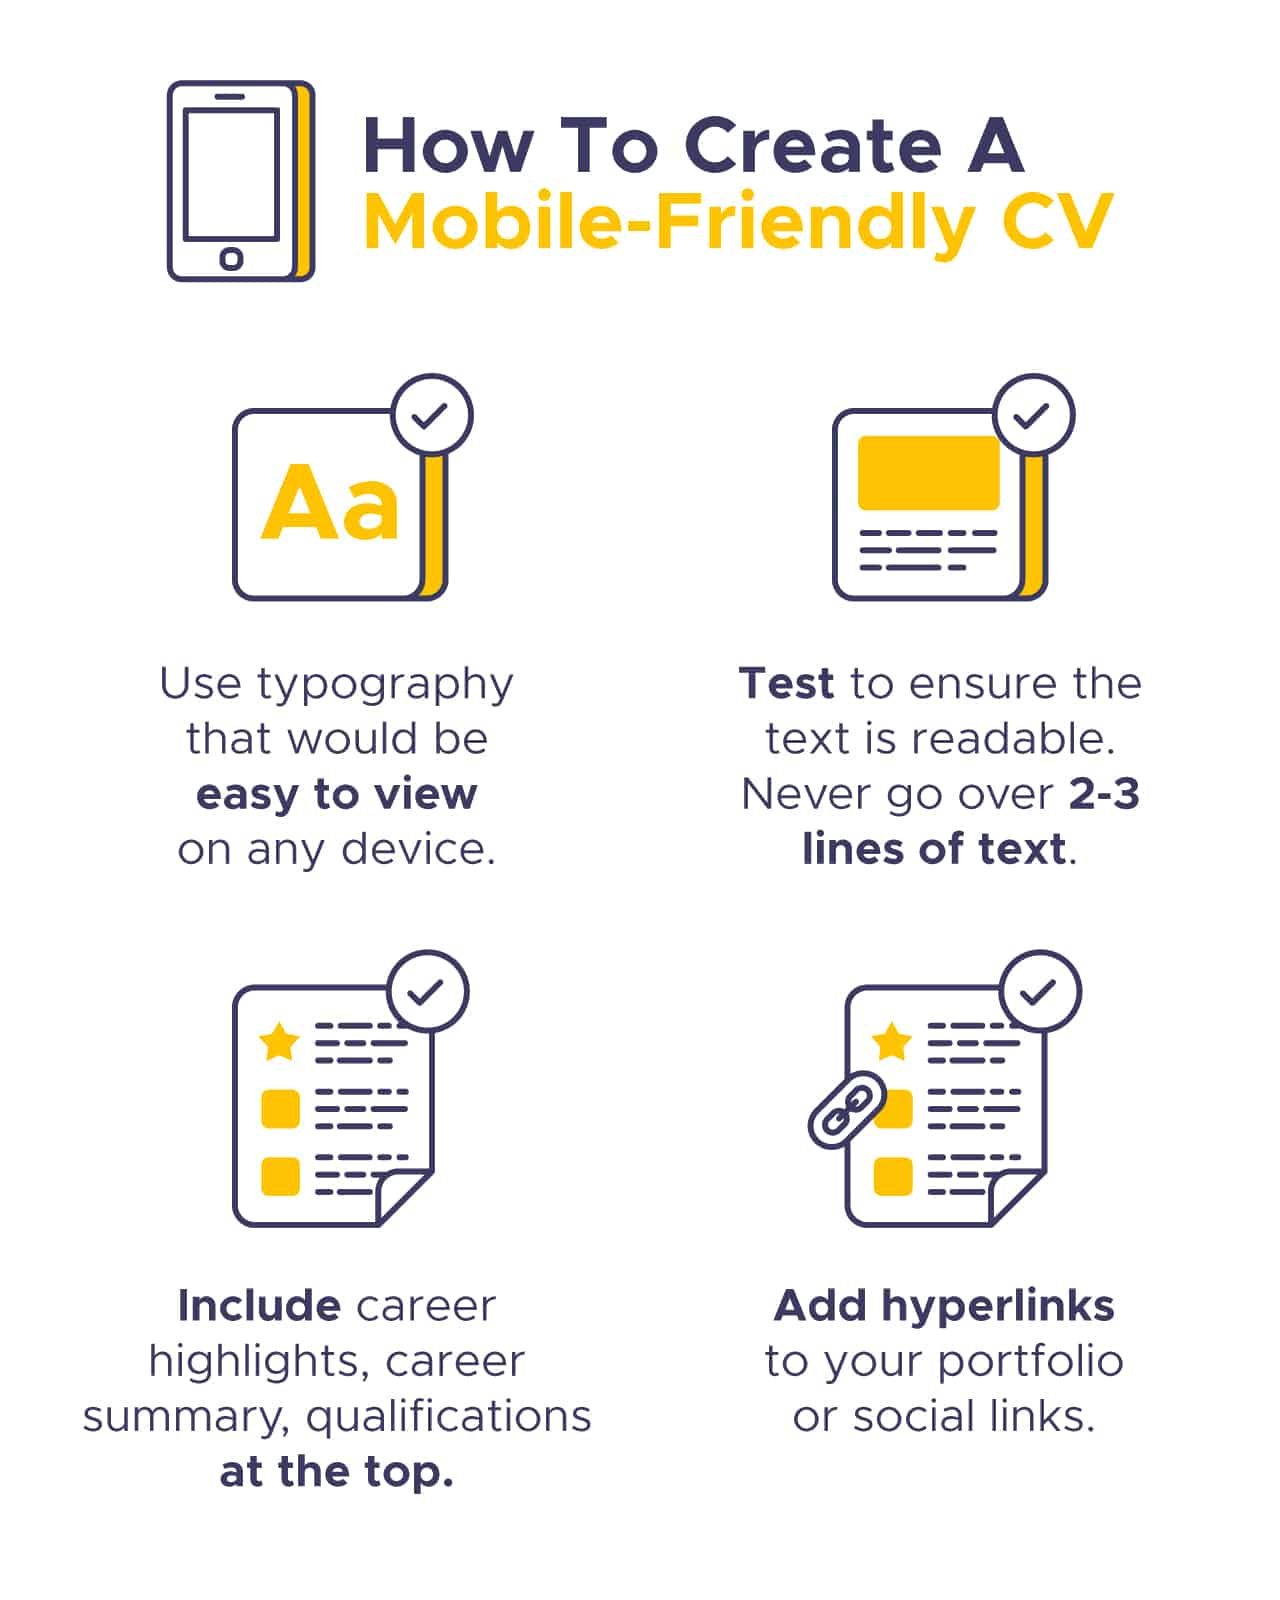 an image showing four things to consider when creating a mobile friendly cv